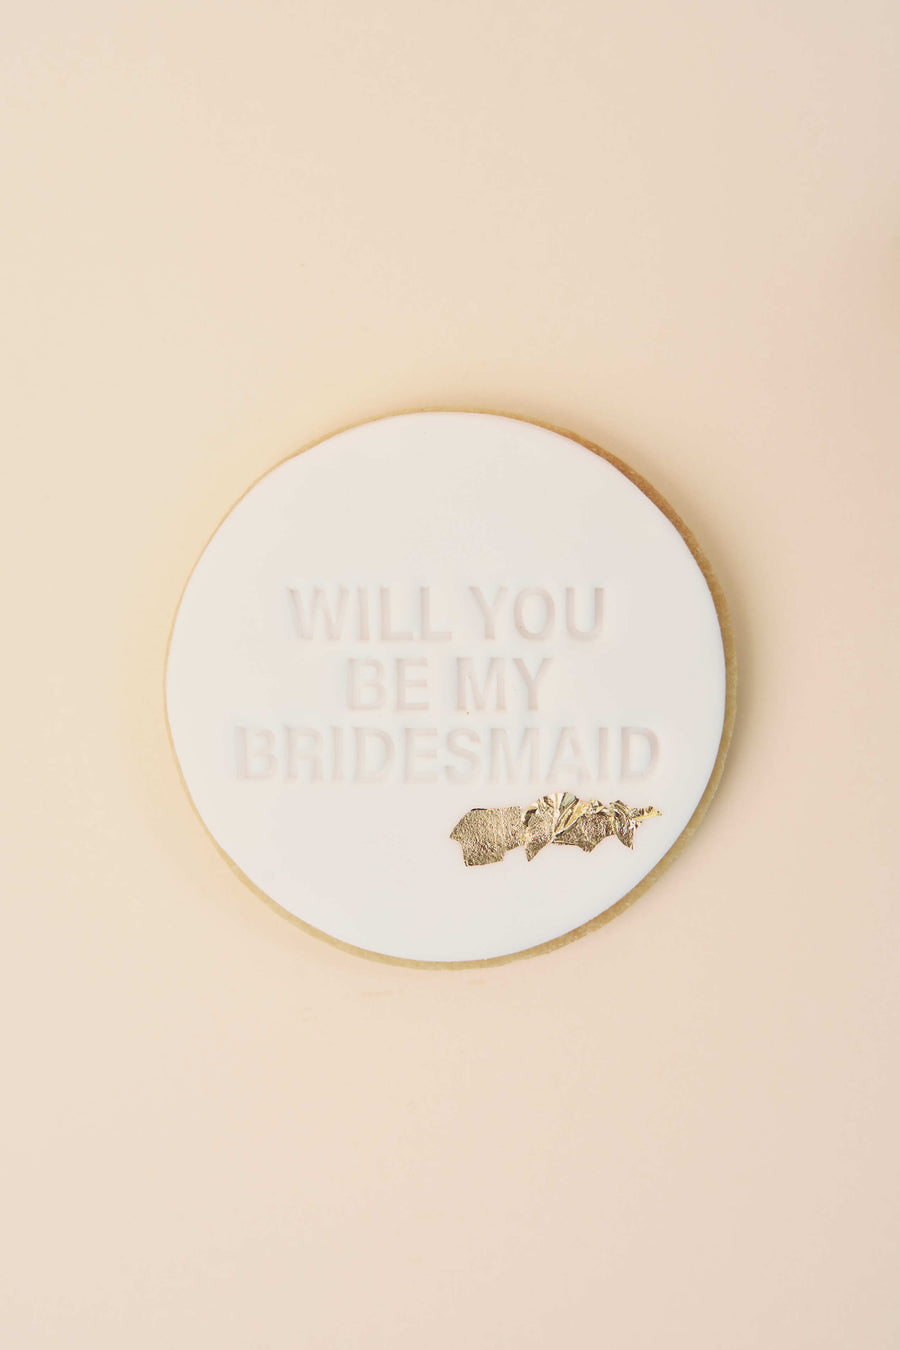 Will you be my bridesmaid?